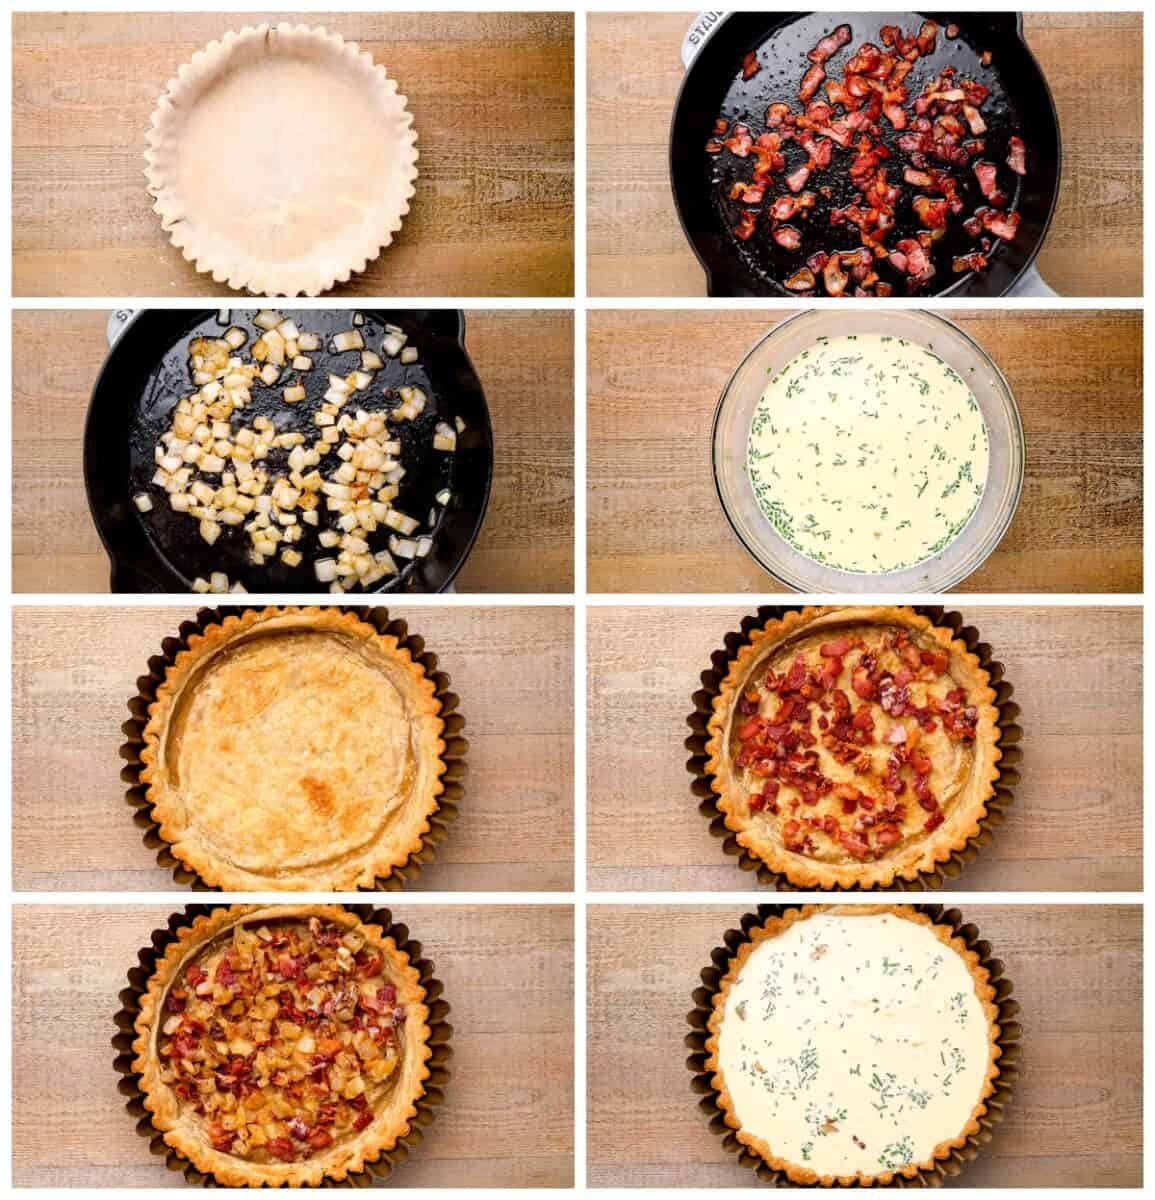 how to make quiche Lorraine step by step photo instructions